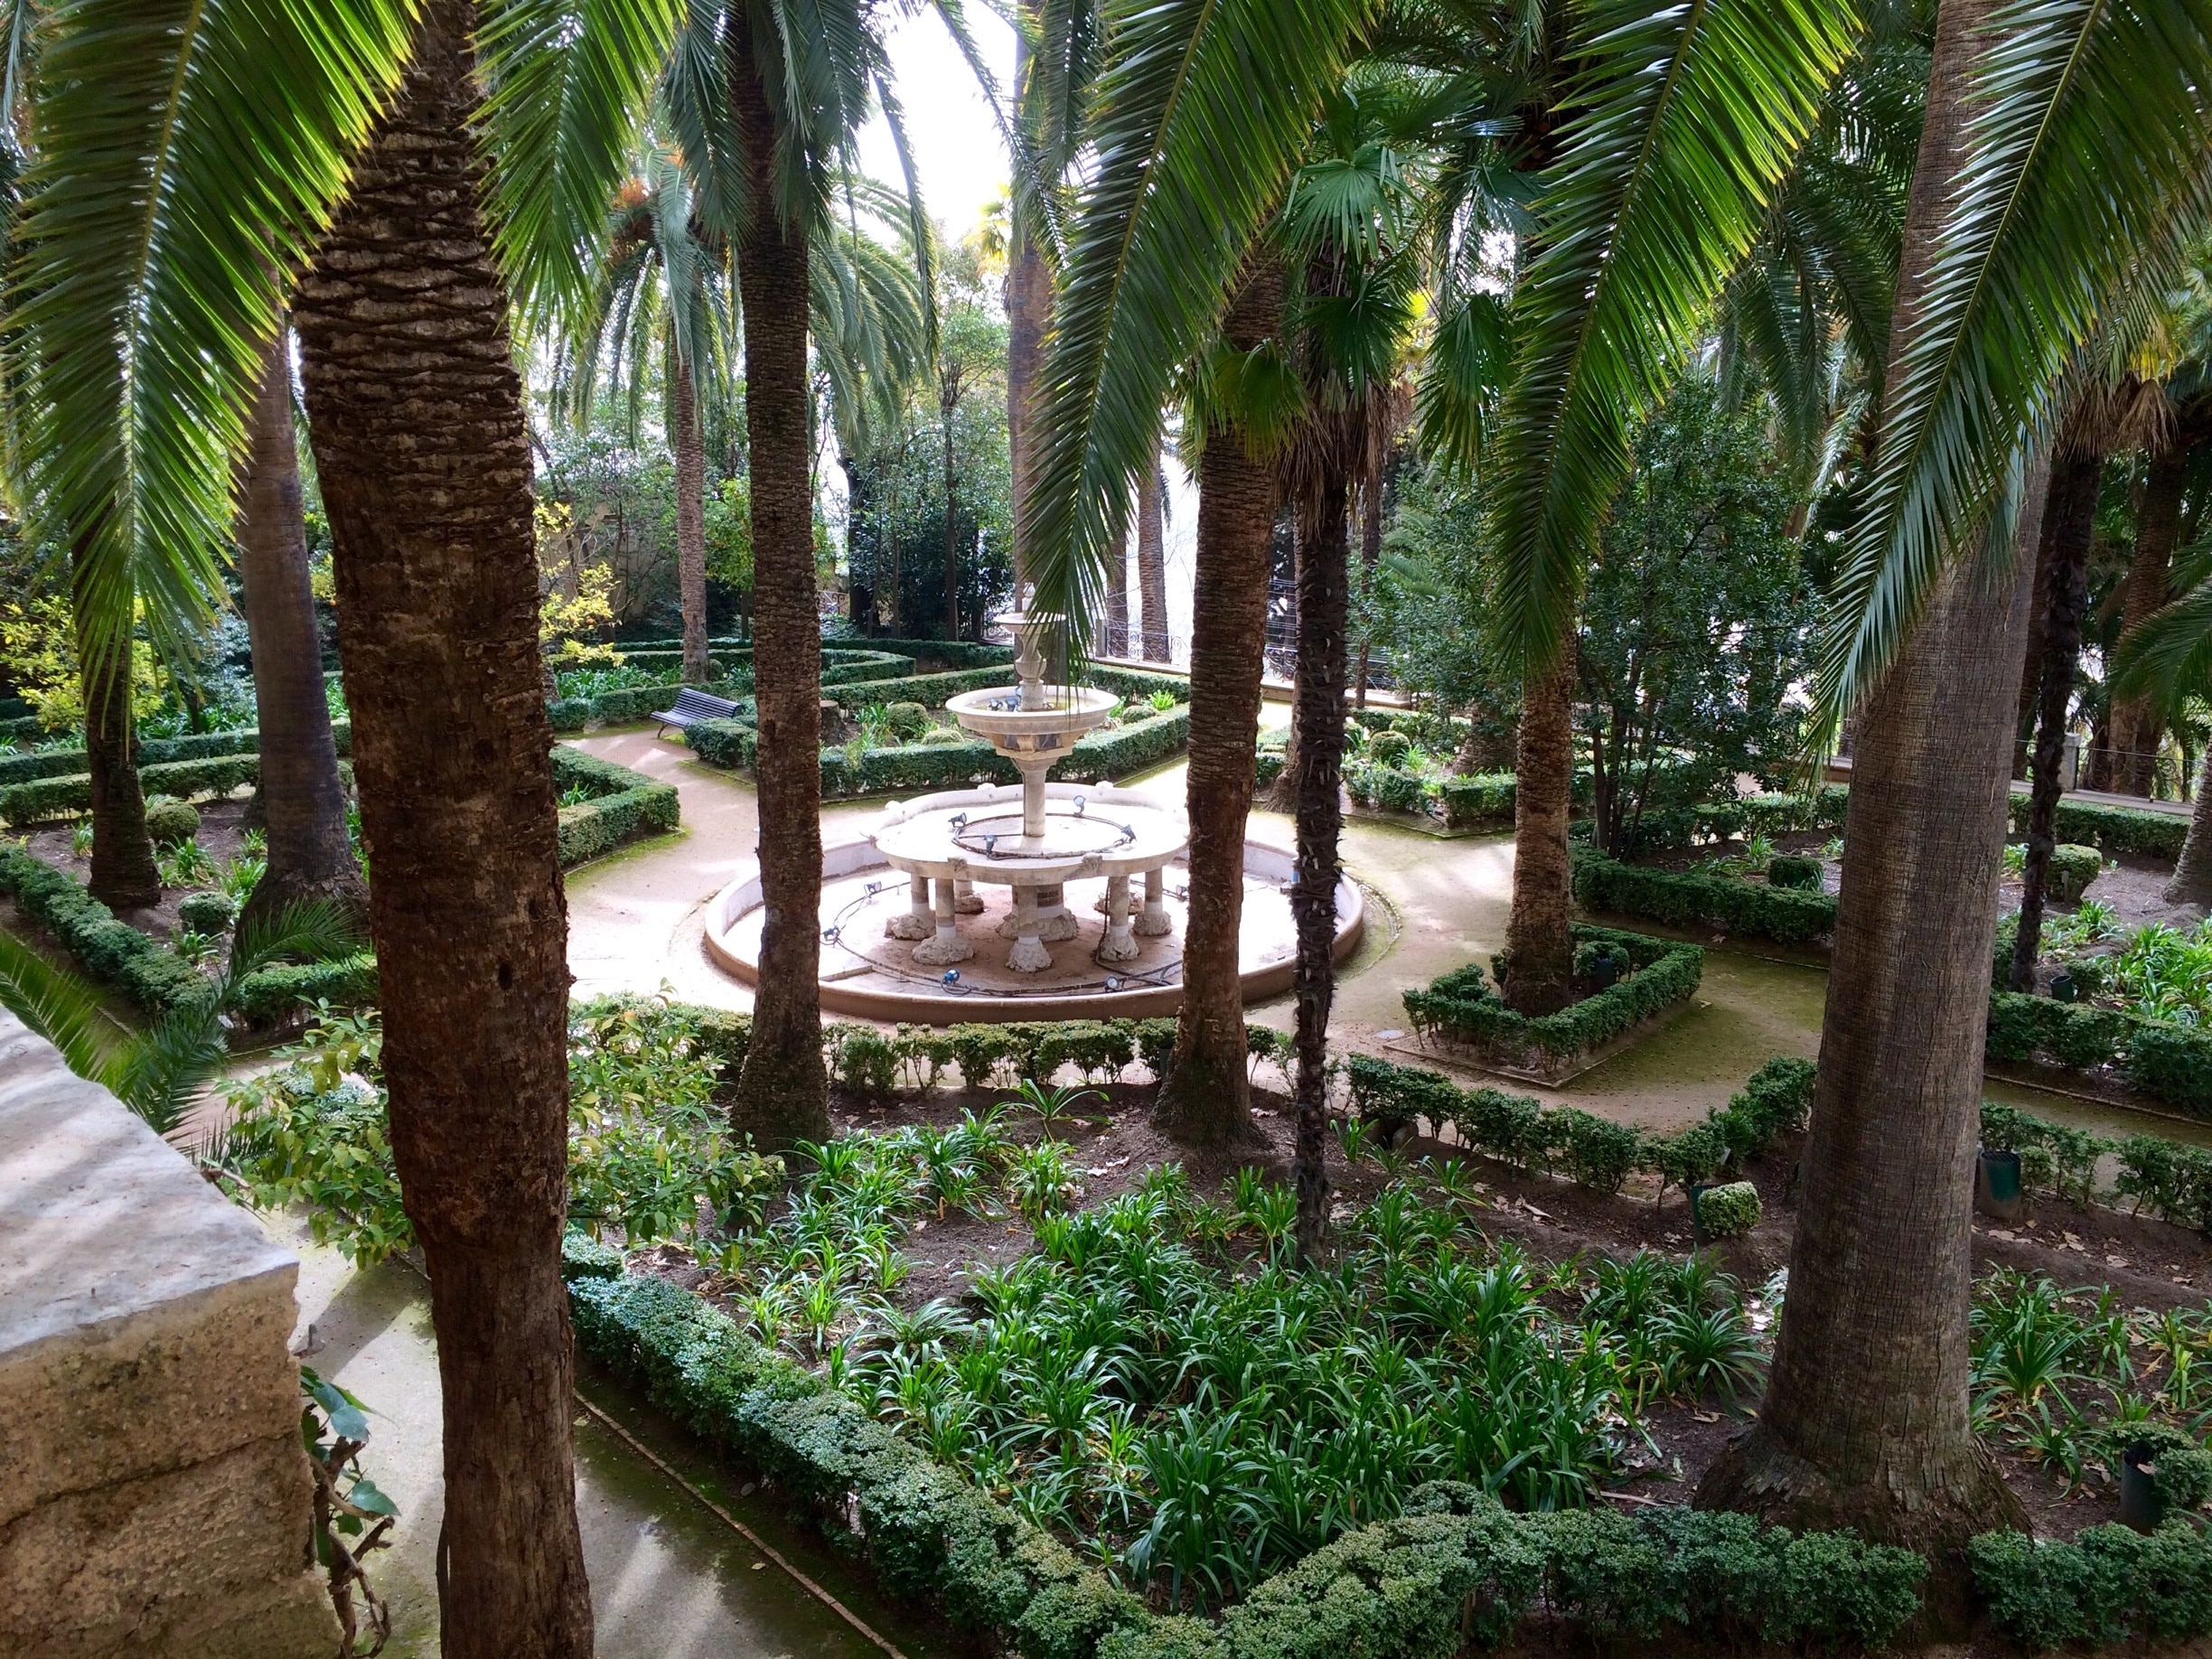 I walked all the way up to find these gardens without really knowing what to expect, but I absolutely loved them! It's said that poet Frederico García Lorca spent quite a bit of time here. There's a grand house surrounded by multiple gardens and fountains. 🌴⛲️🍊It's a rather peaceful spot with overlooks of the city and surprises around every corner. There are plaques displaying local Spanish poetry throughout, and I even found a gang of peacocks wandering around! Definitely plan to spend a lot of time here. Update: there is also a hidden lake with a mini castle on an island in the middle, as well as ducks... 🦆